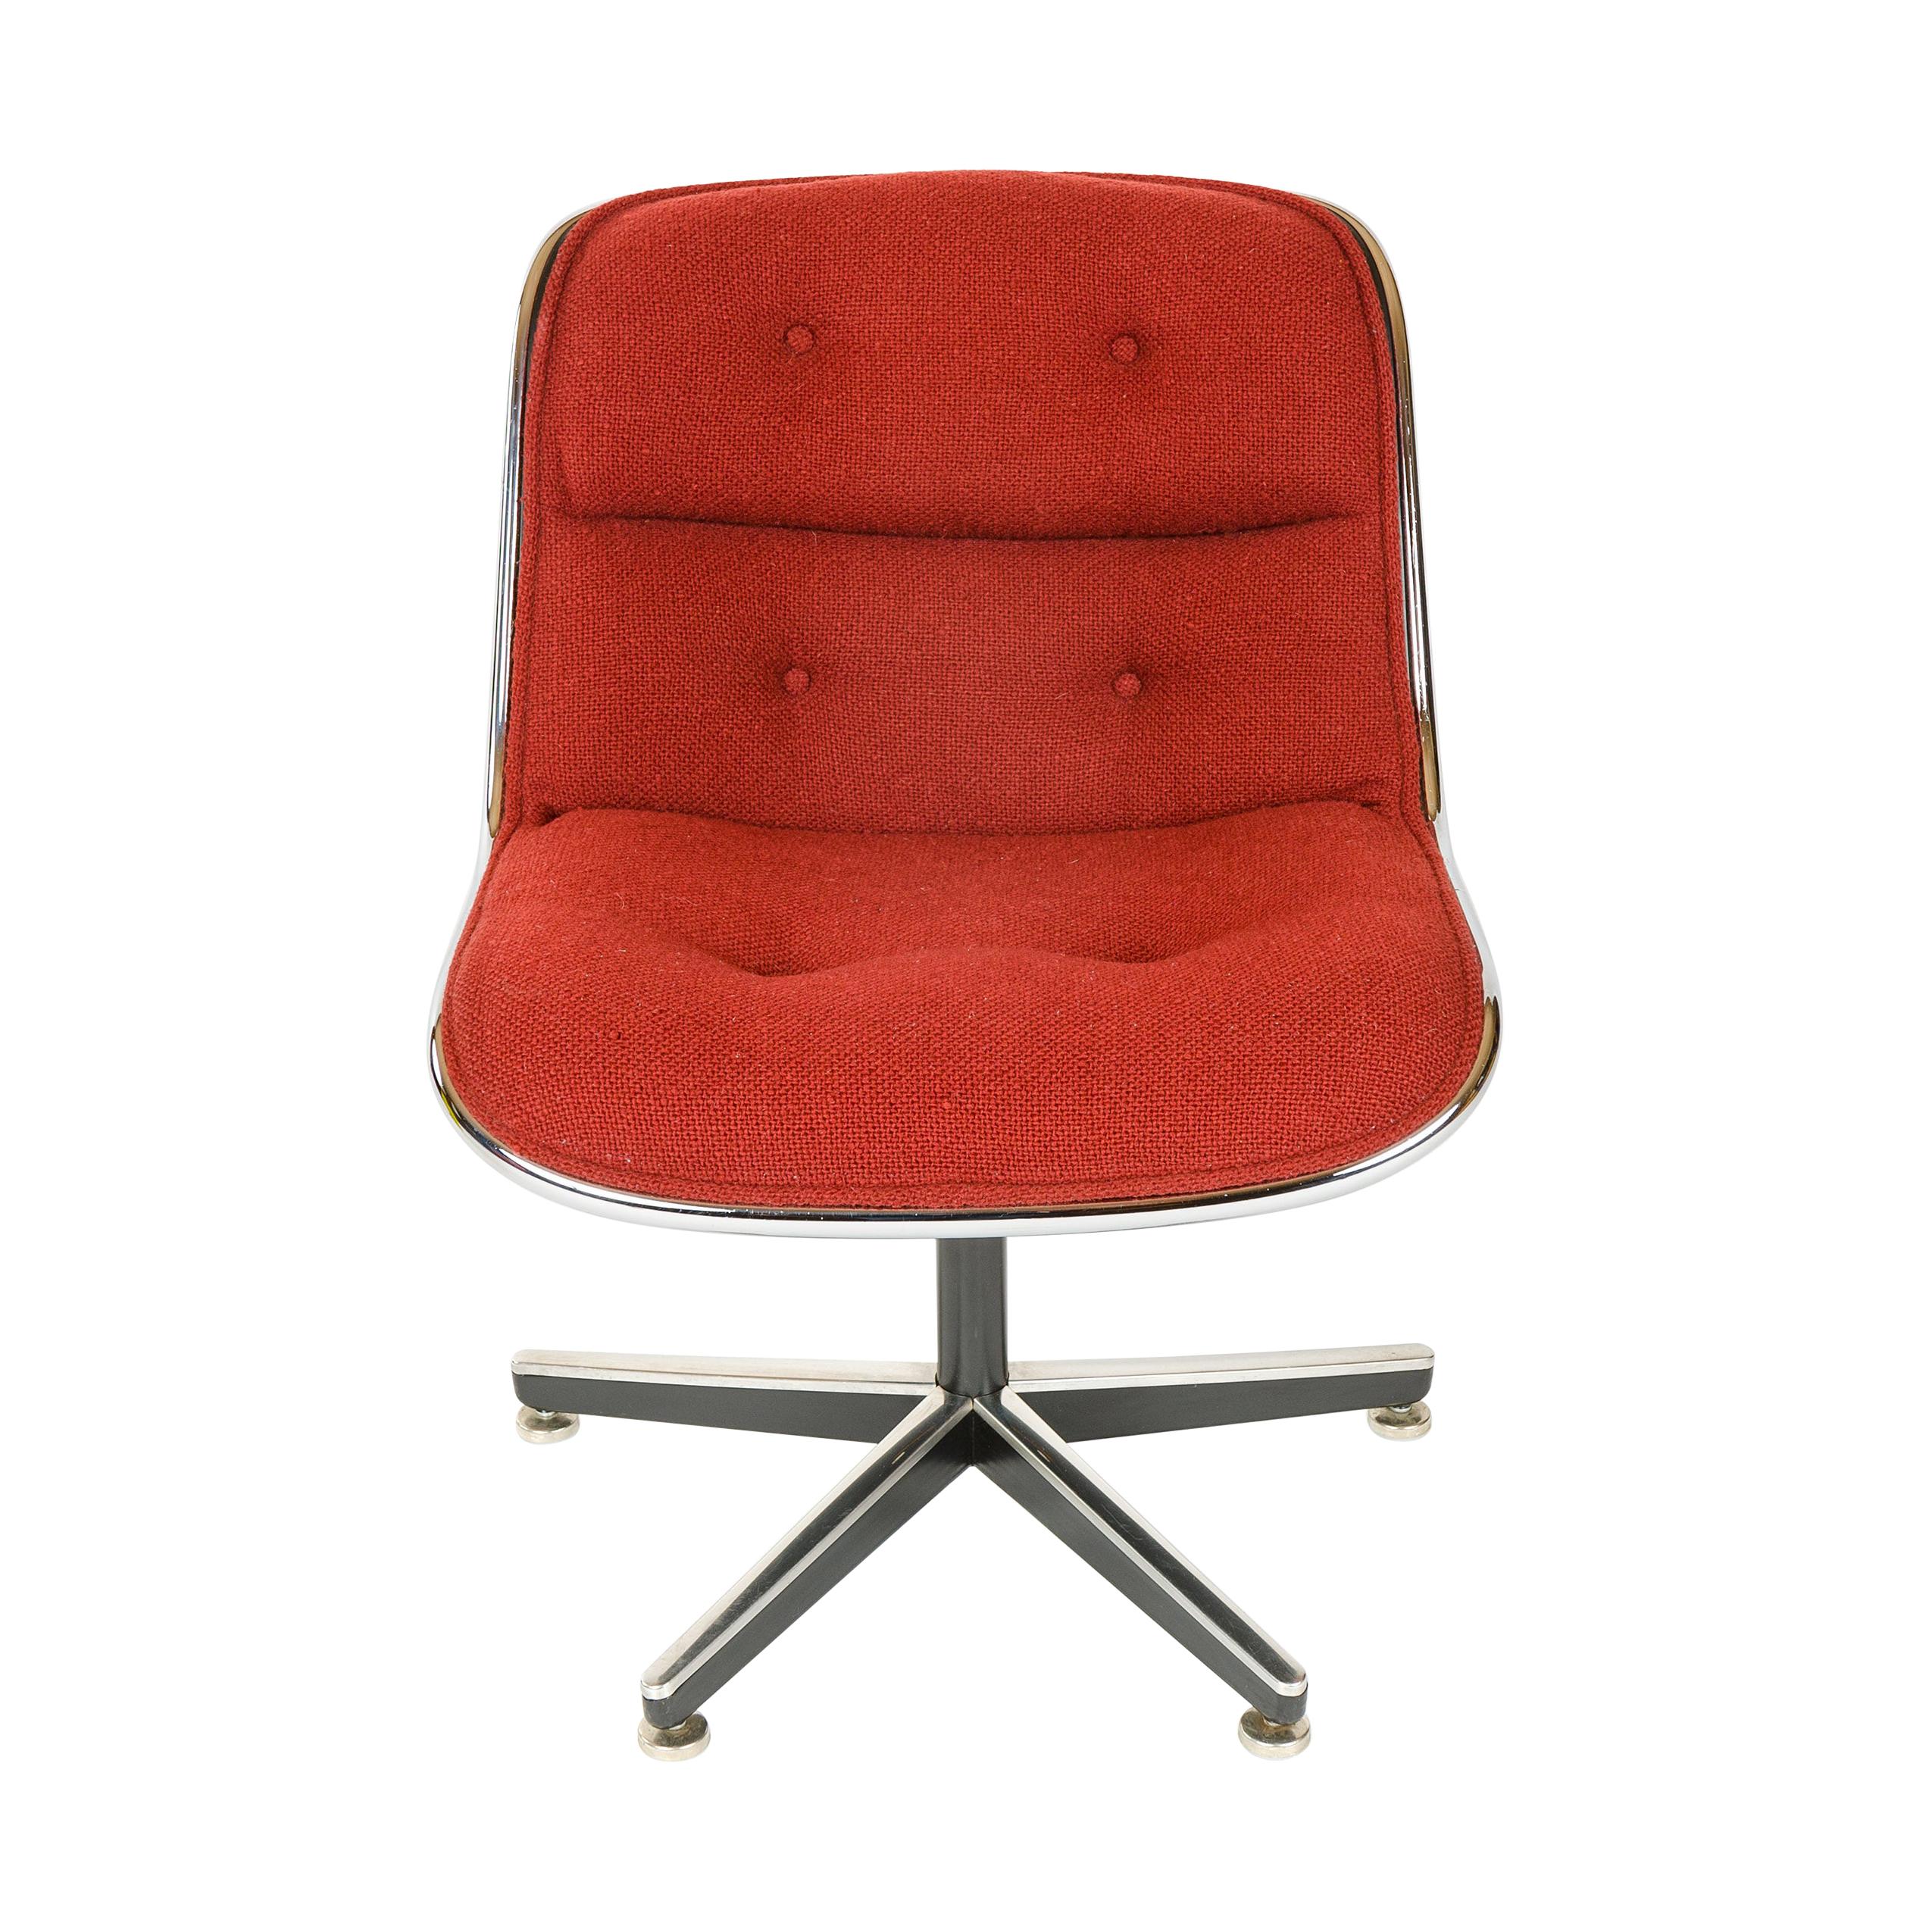 1960s Pollack Executive Chair by Charles Pollack for Knoll